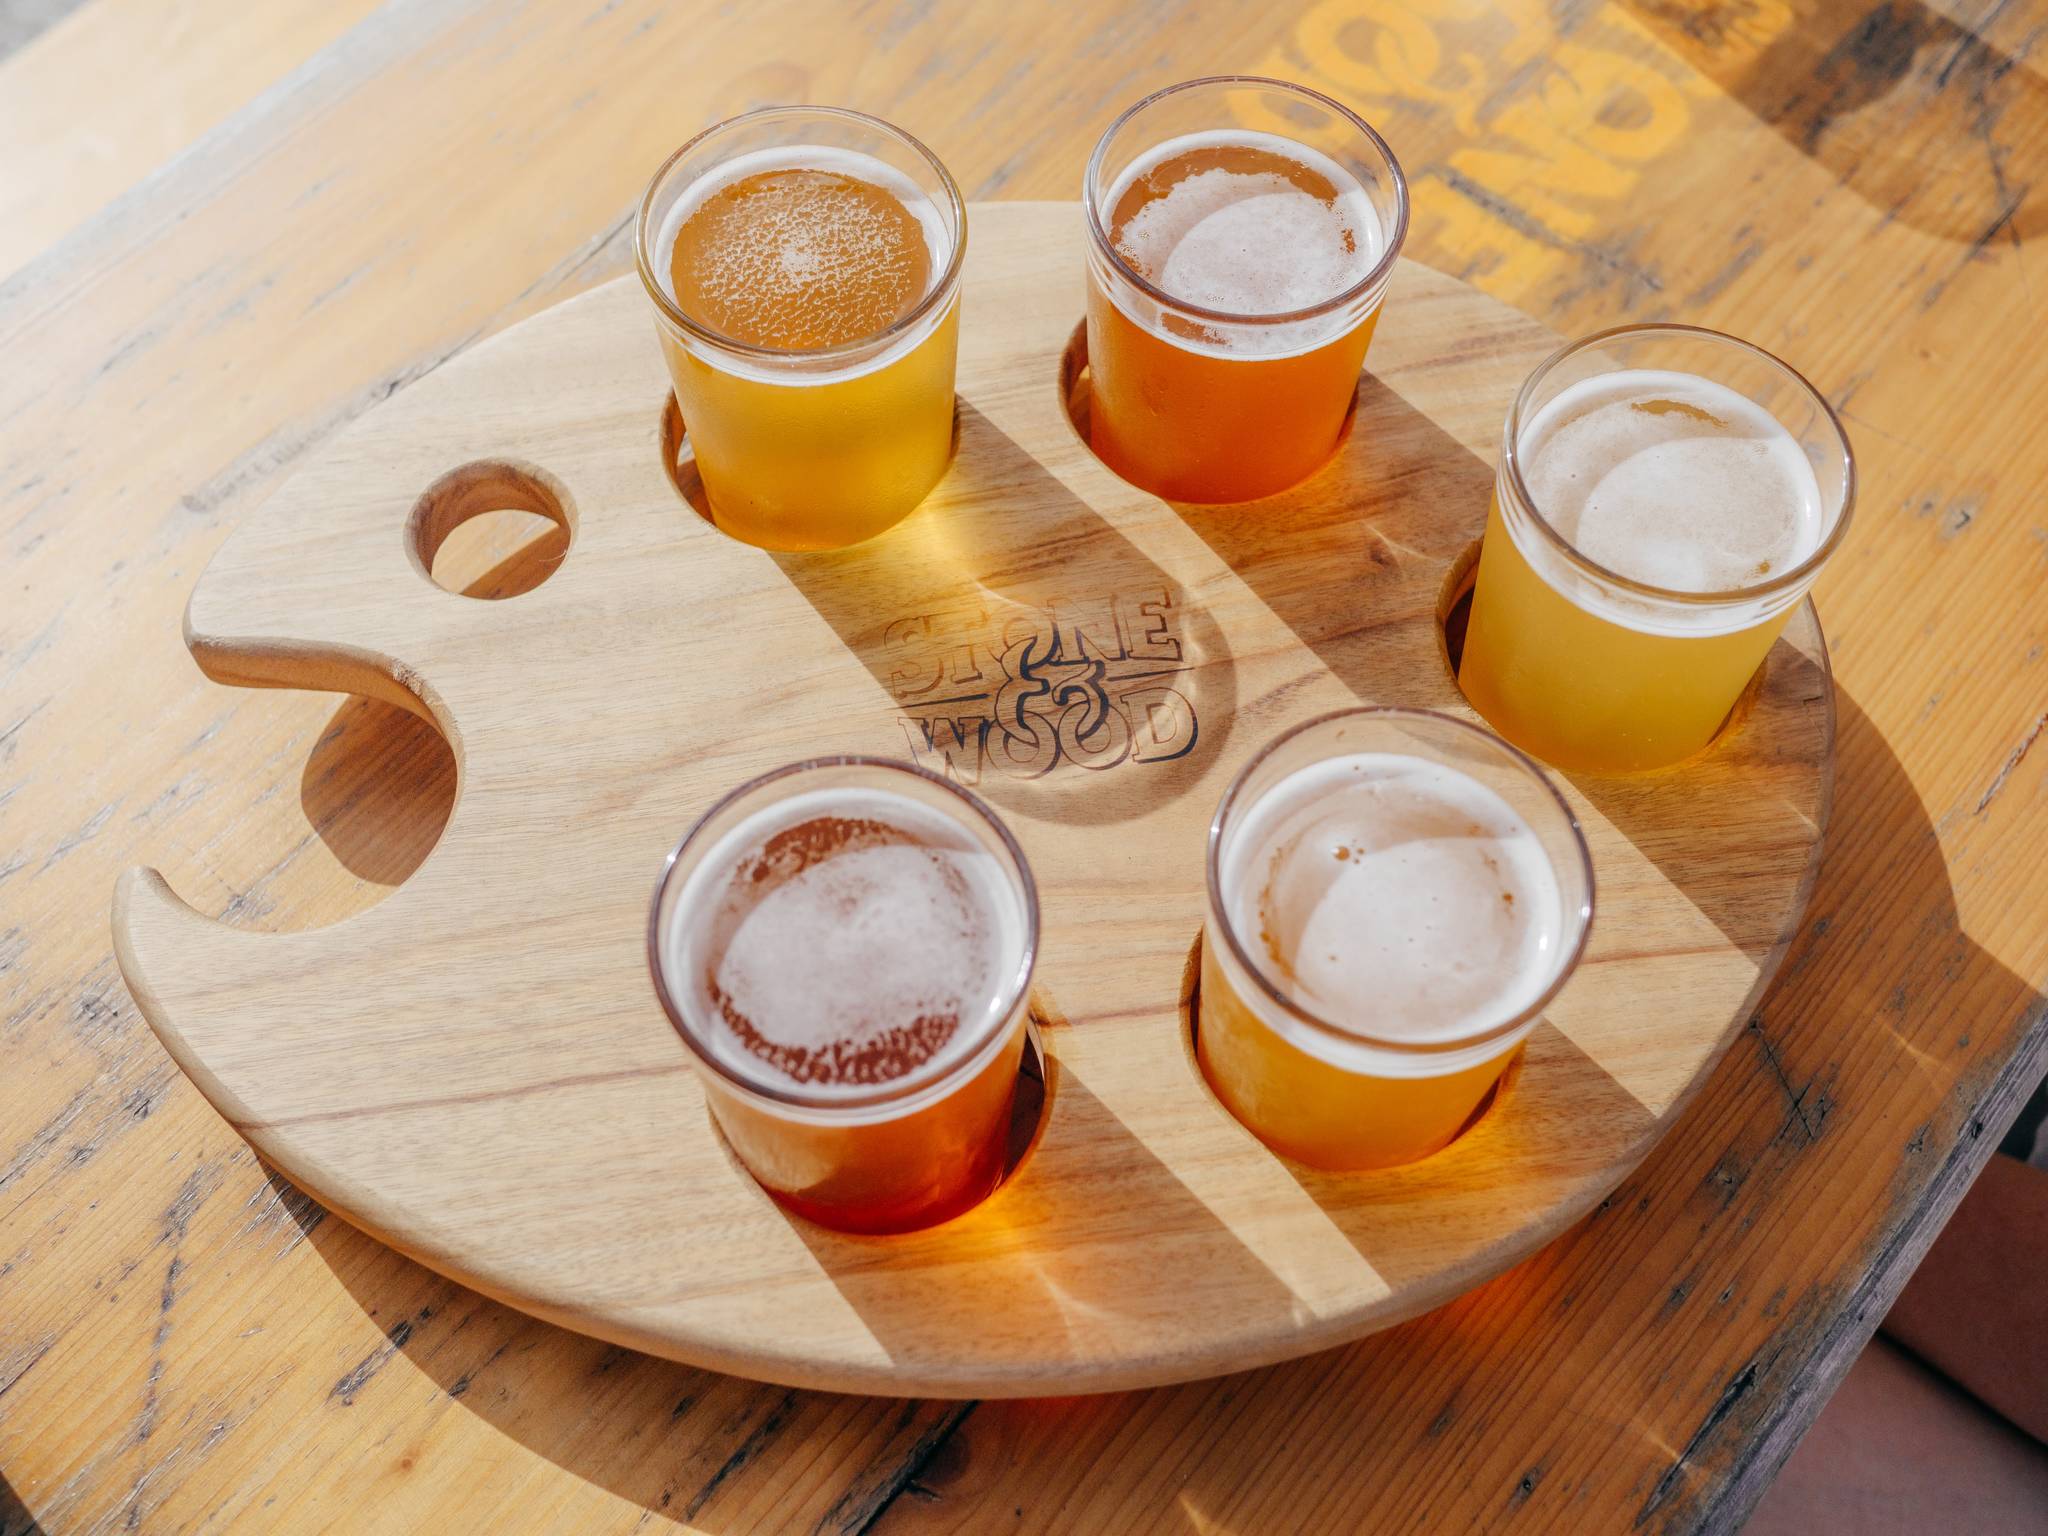 The Brewer’s Guild of Alaska, a trade organization, is celebrating AK Beer Month through Feb. 14 with a scavenger hunt, beer releases and other deals from breweries in Juneau and across Alaska. (Unsplash / Radovan)